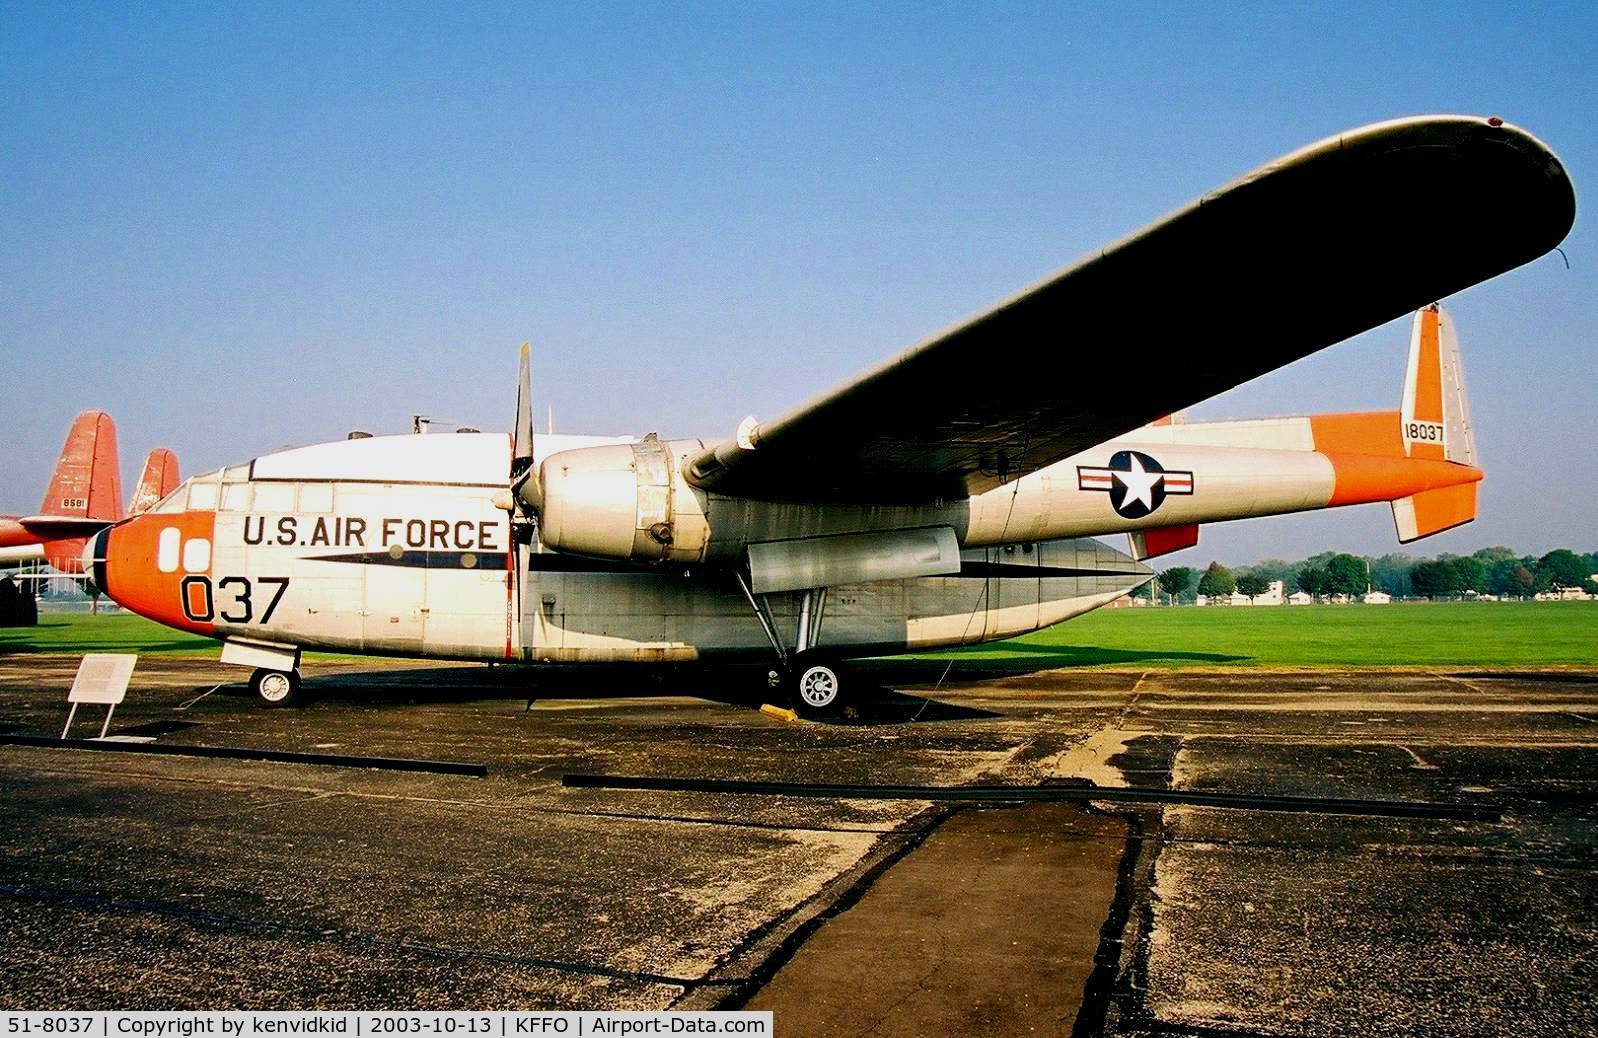 51-8037, 1951 Fairchild C-119J-FA Flying Boxcar C/N 10915, At The Museum of the United States Air Force Dayton Ohio.